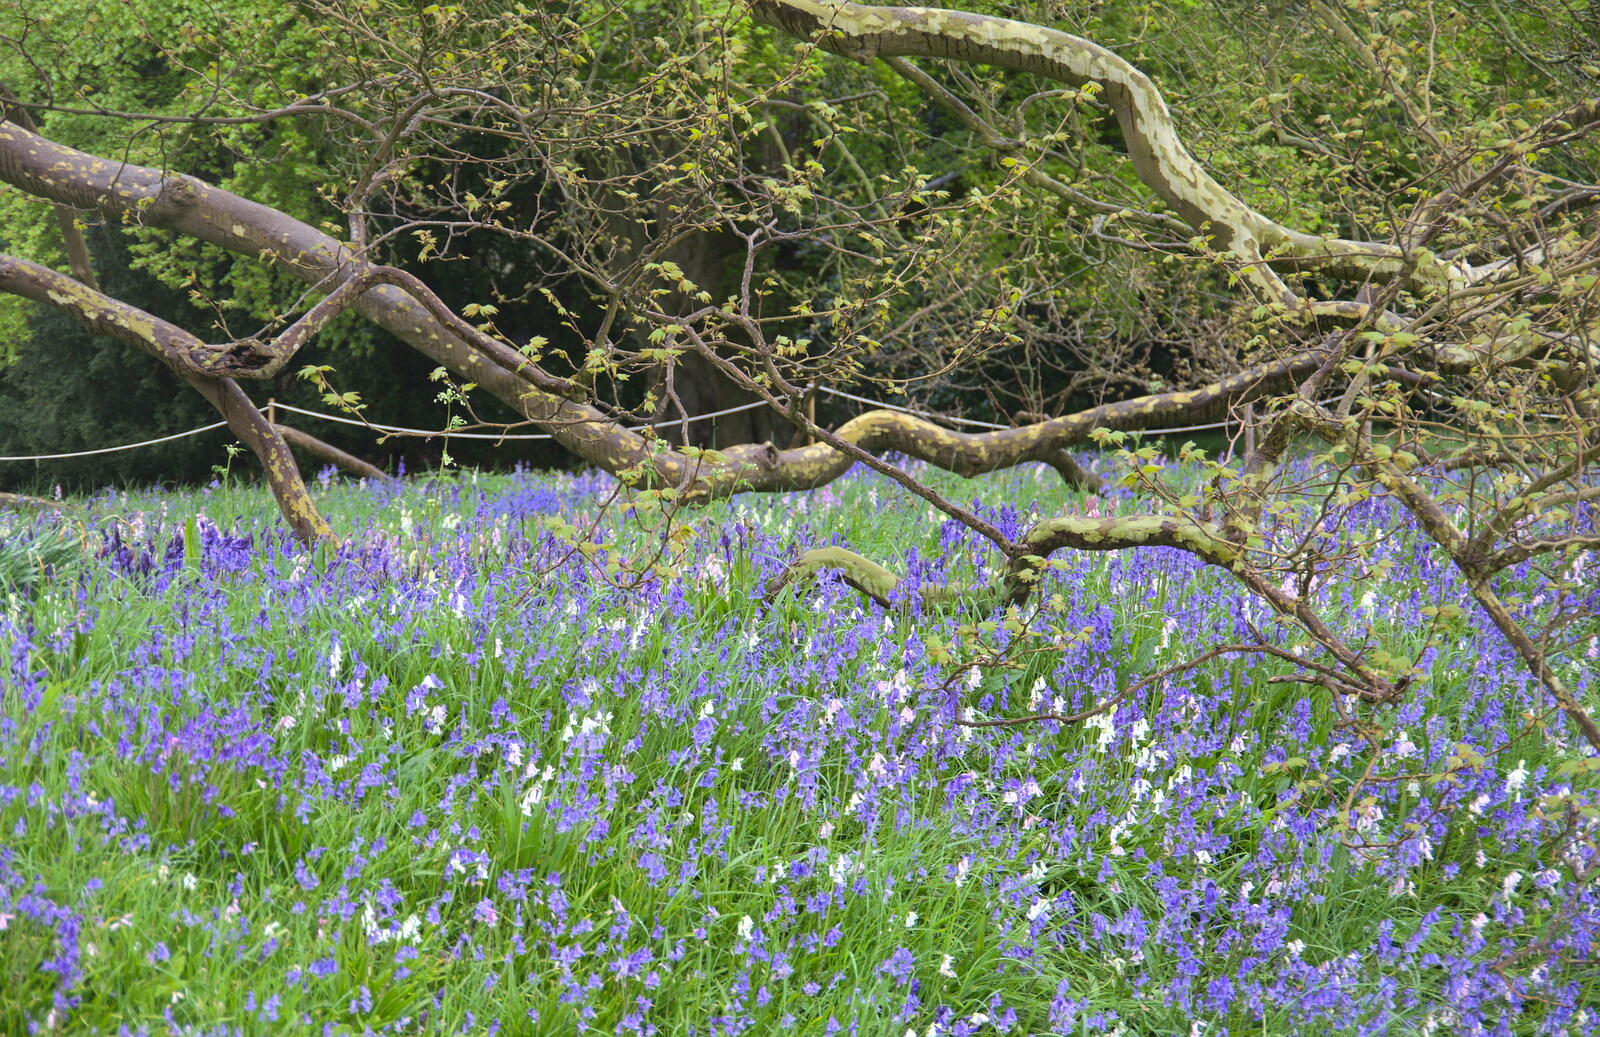 The bluebells are out in force from A Trip to Blickling Hall, Aylsham, Norfolk - 29th April 2018